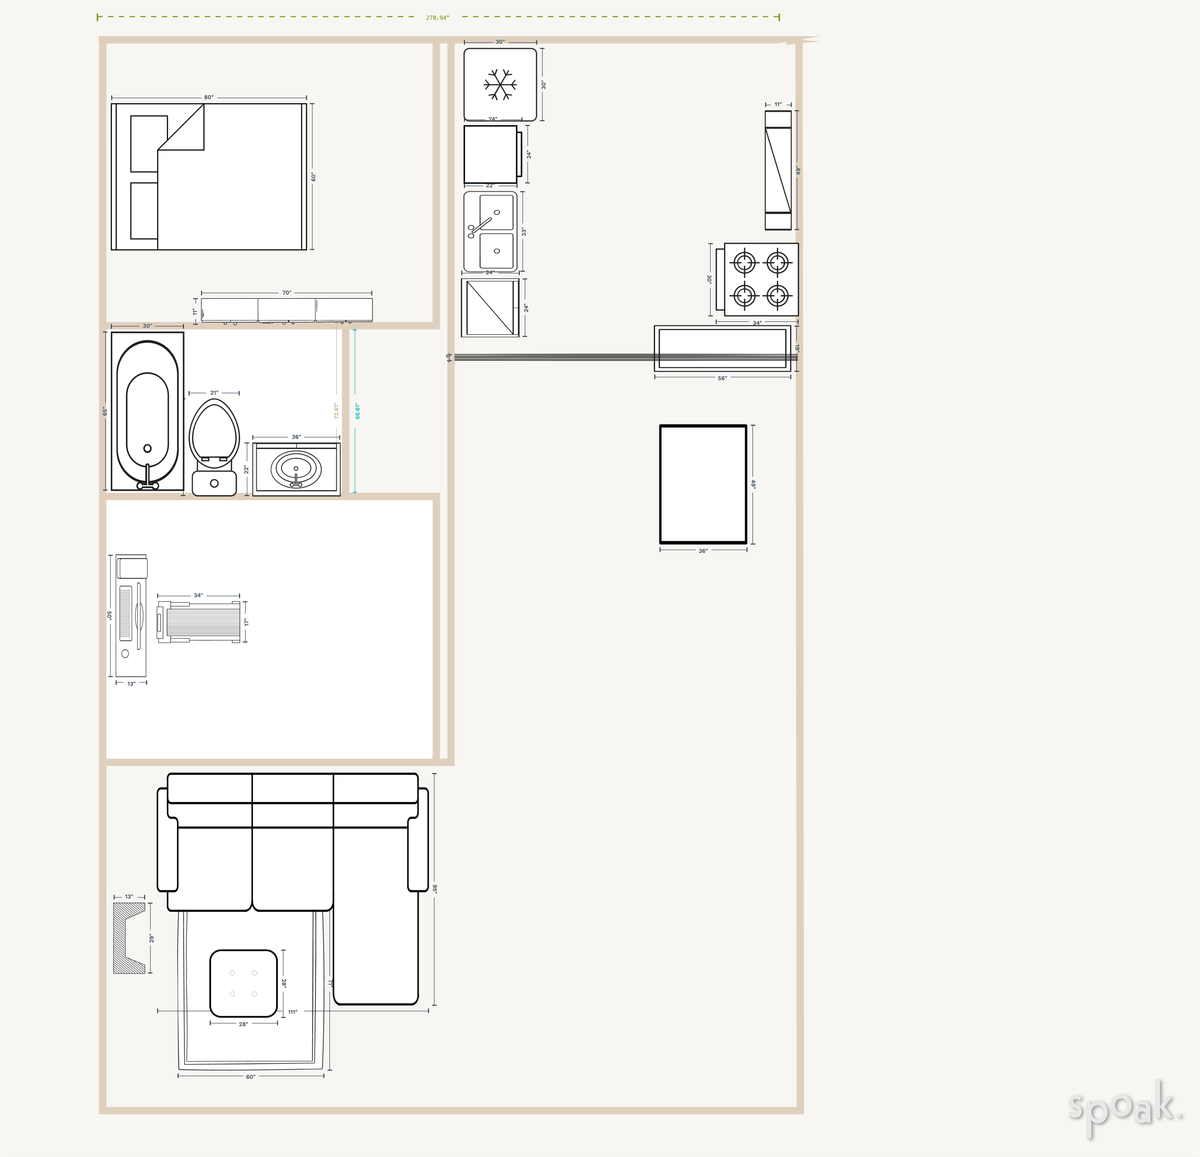 Two Bedroom House Plan designed by Sarah Foran